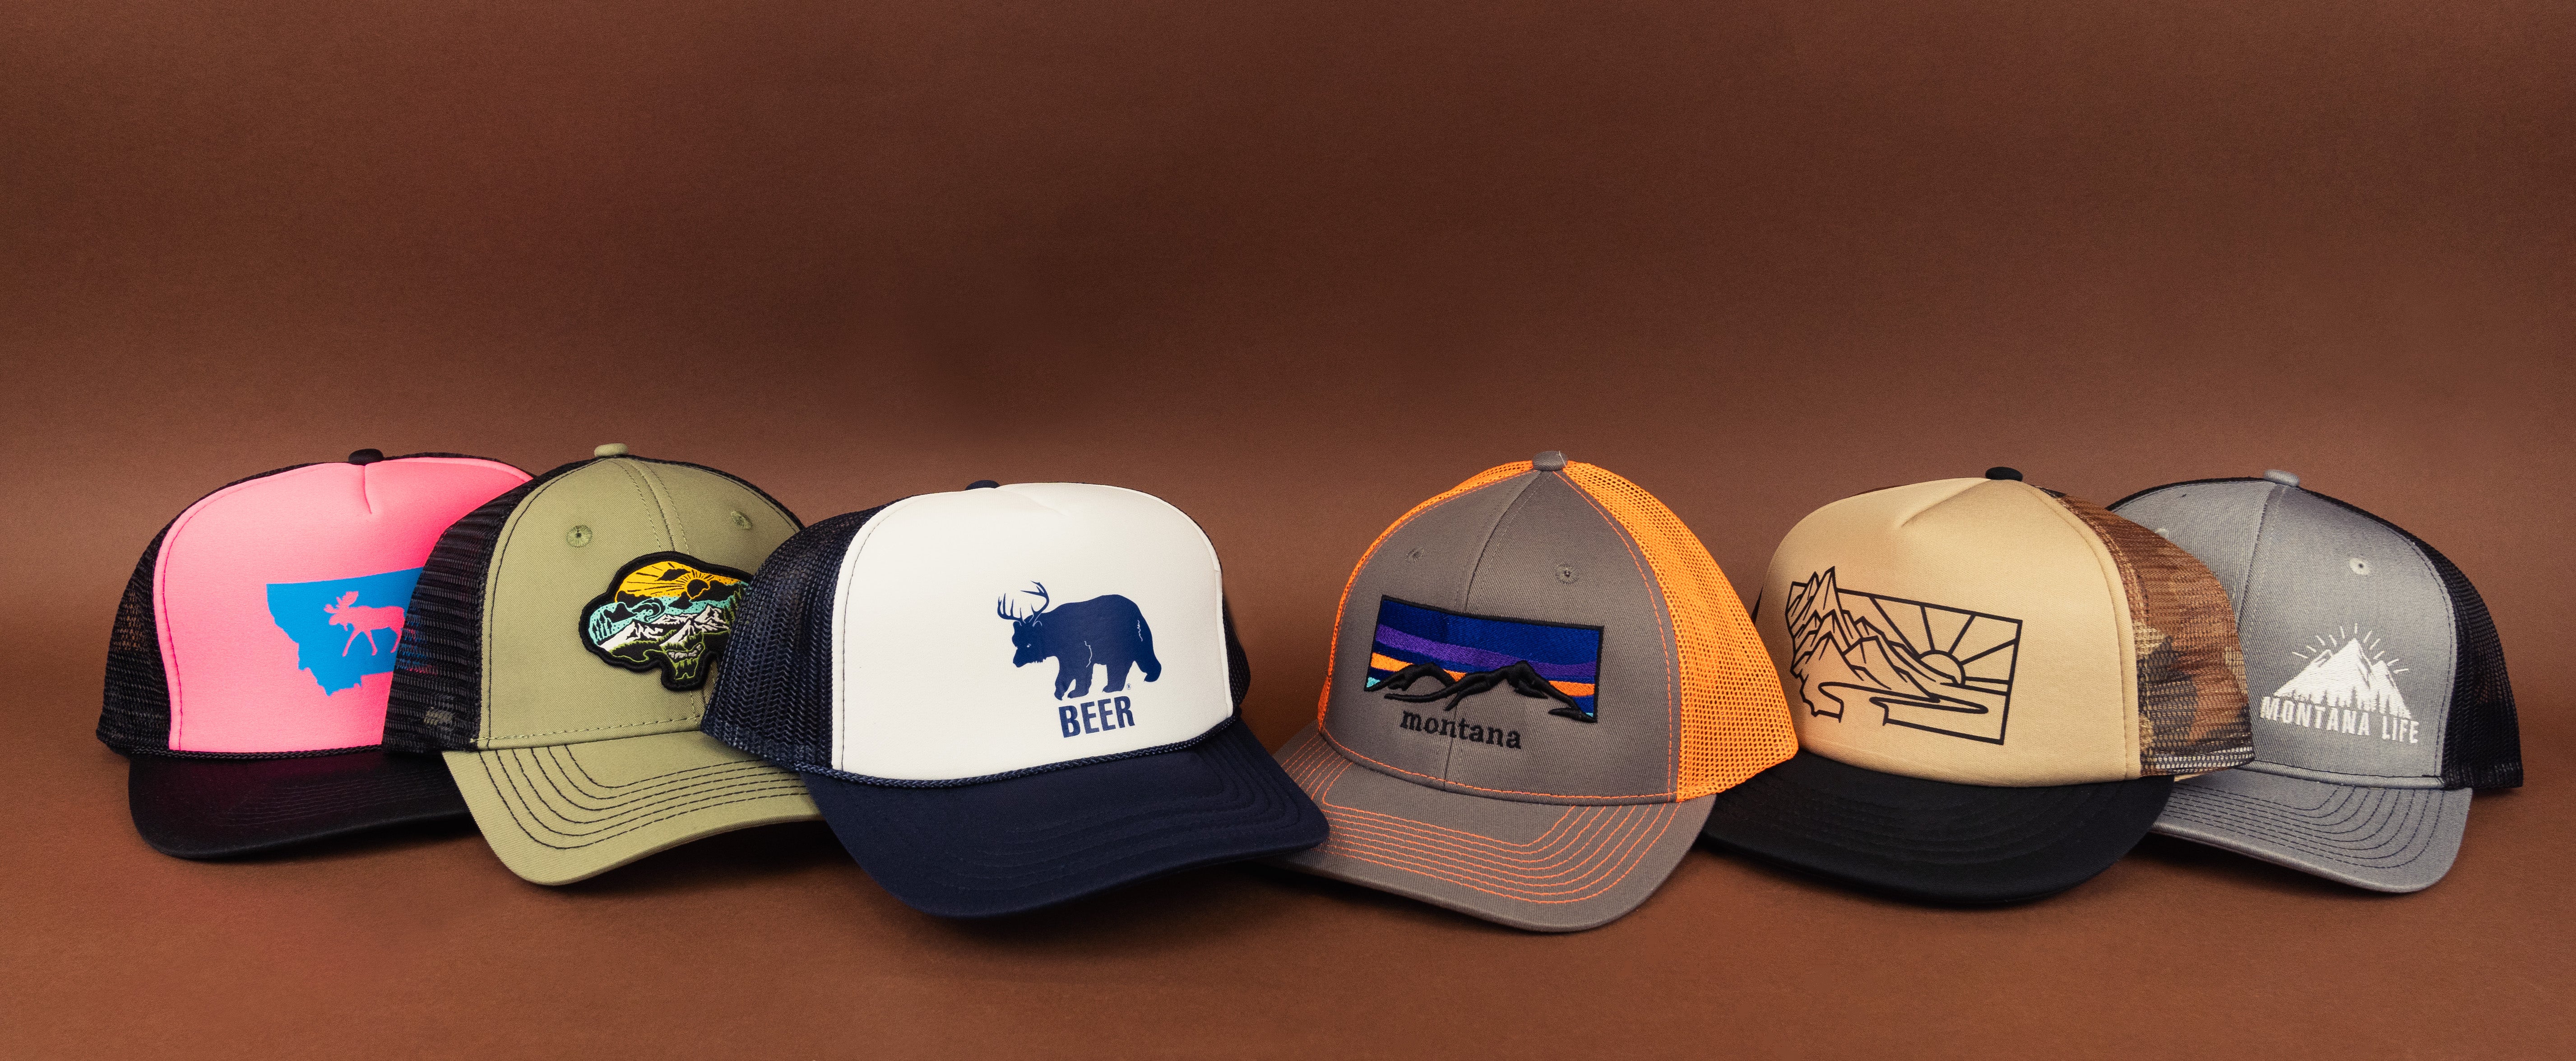 Montana Hats and Caps For Sale